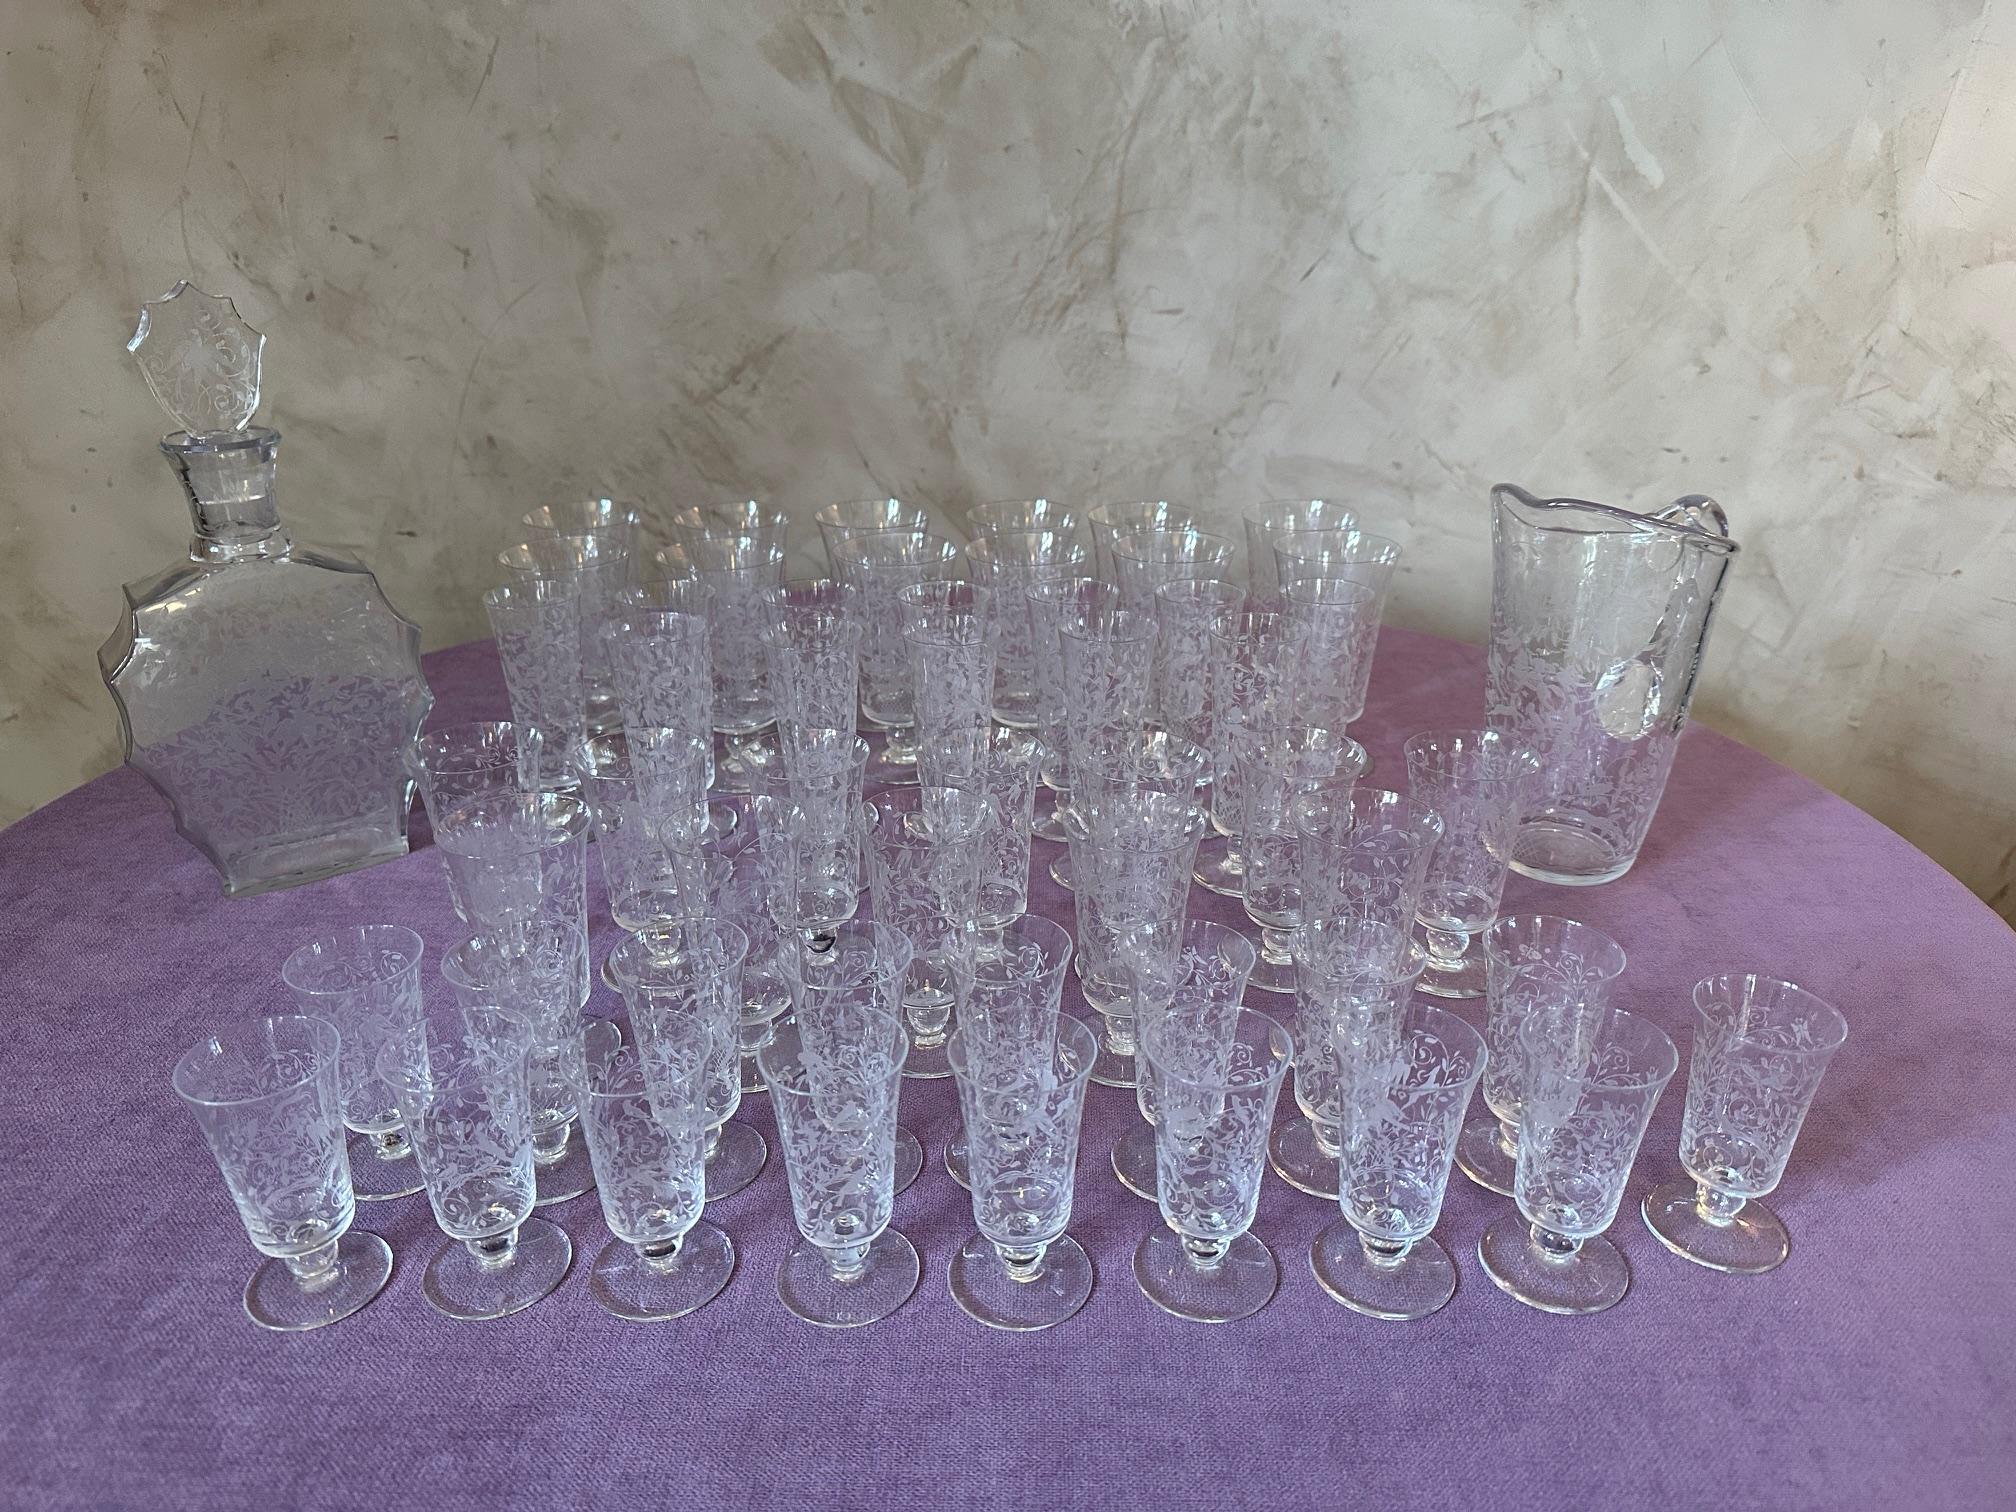 20th century French Set of Crystal Baccarat Glasses, Pitcher and Decanter For Sale 6